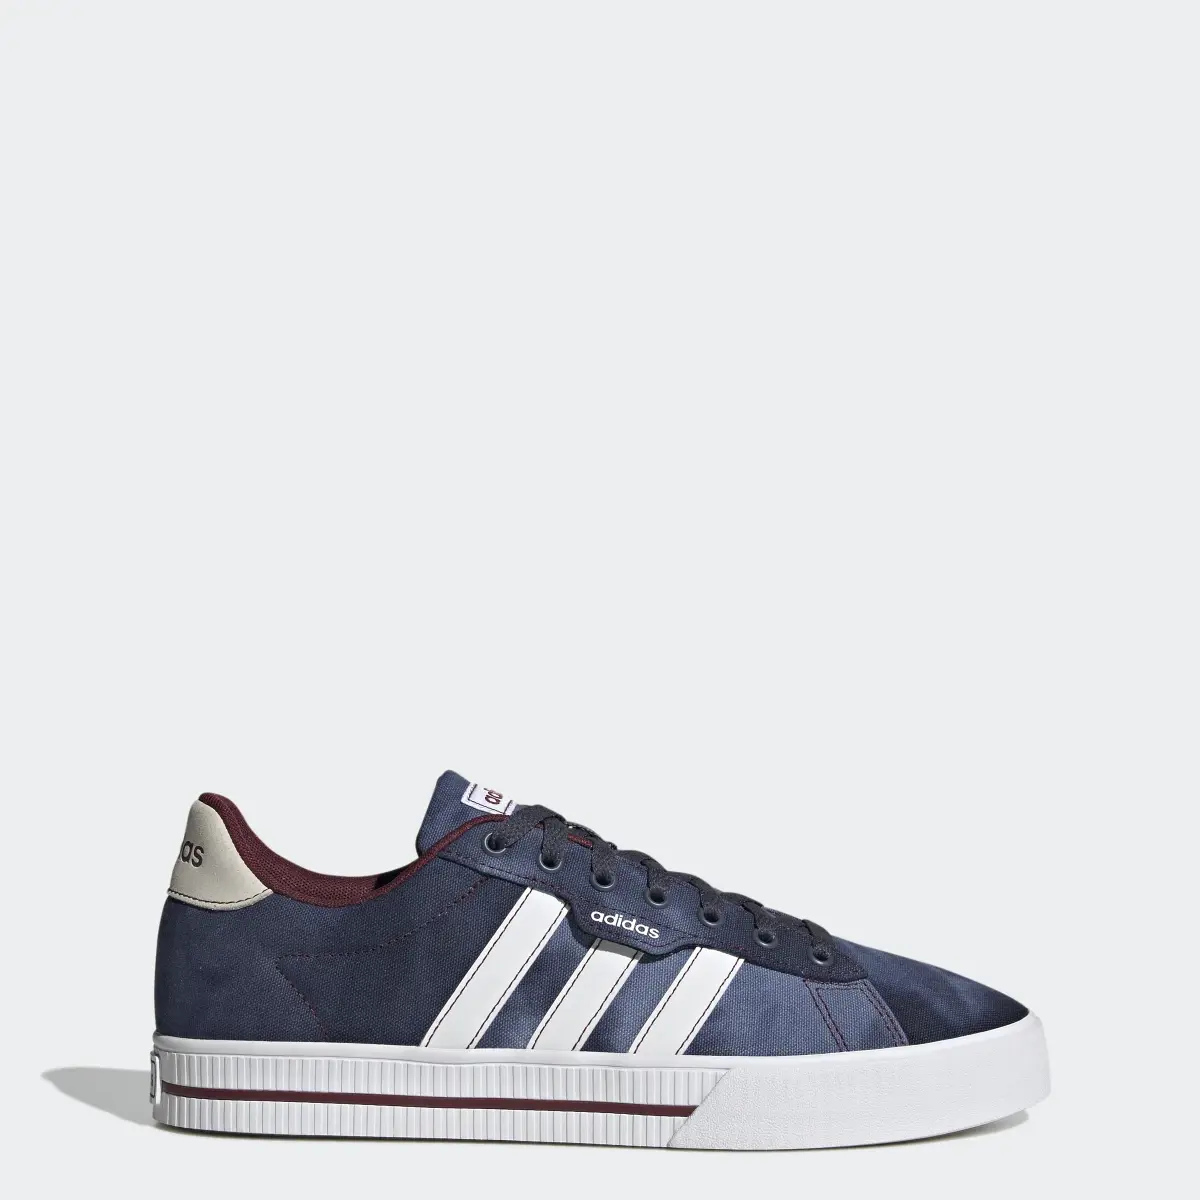 Adidas Daily 3.0 Lifestyle Skateboarding Suede Shoes. 1